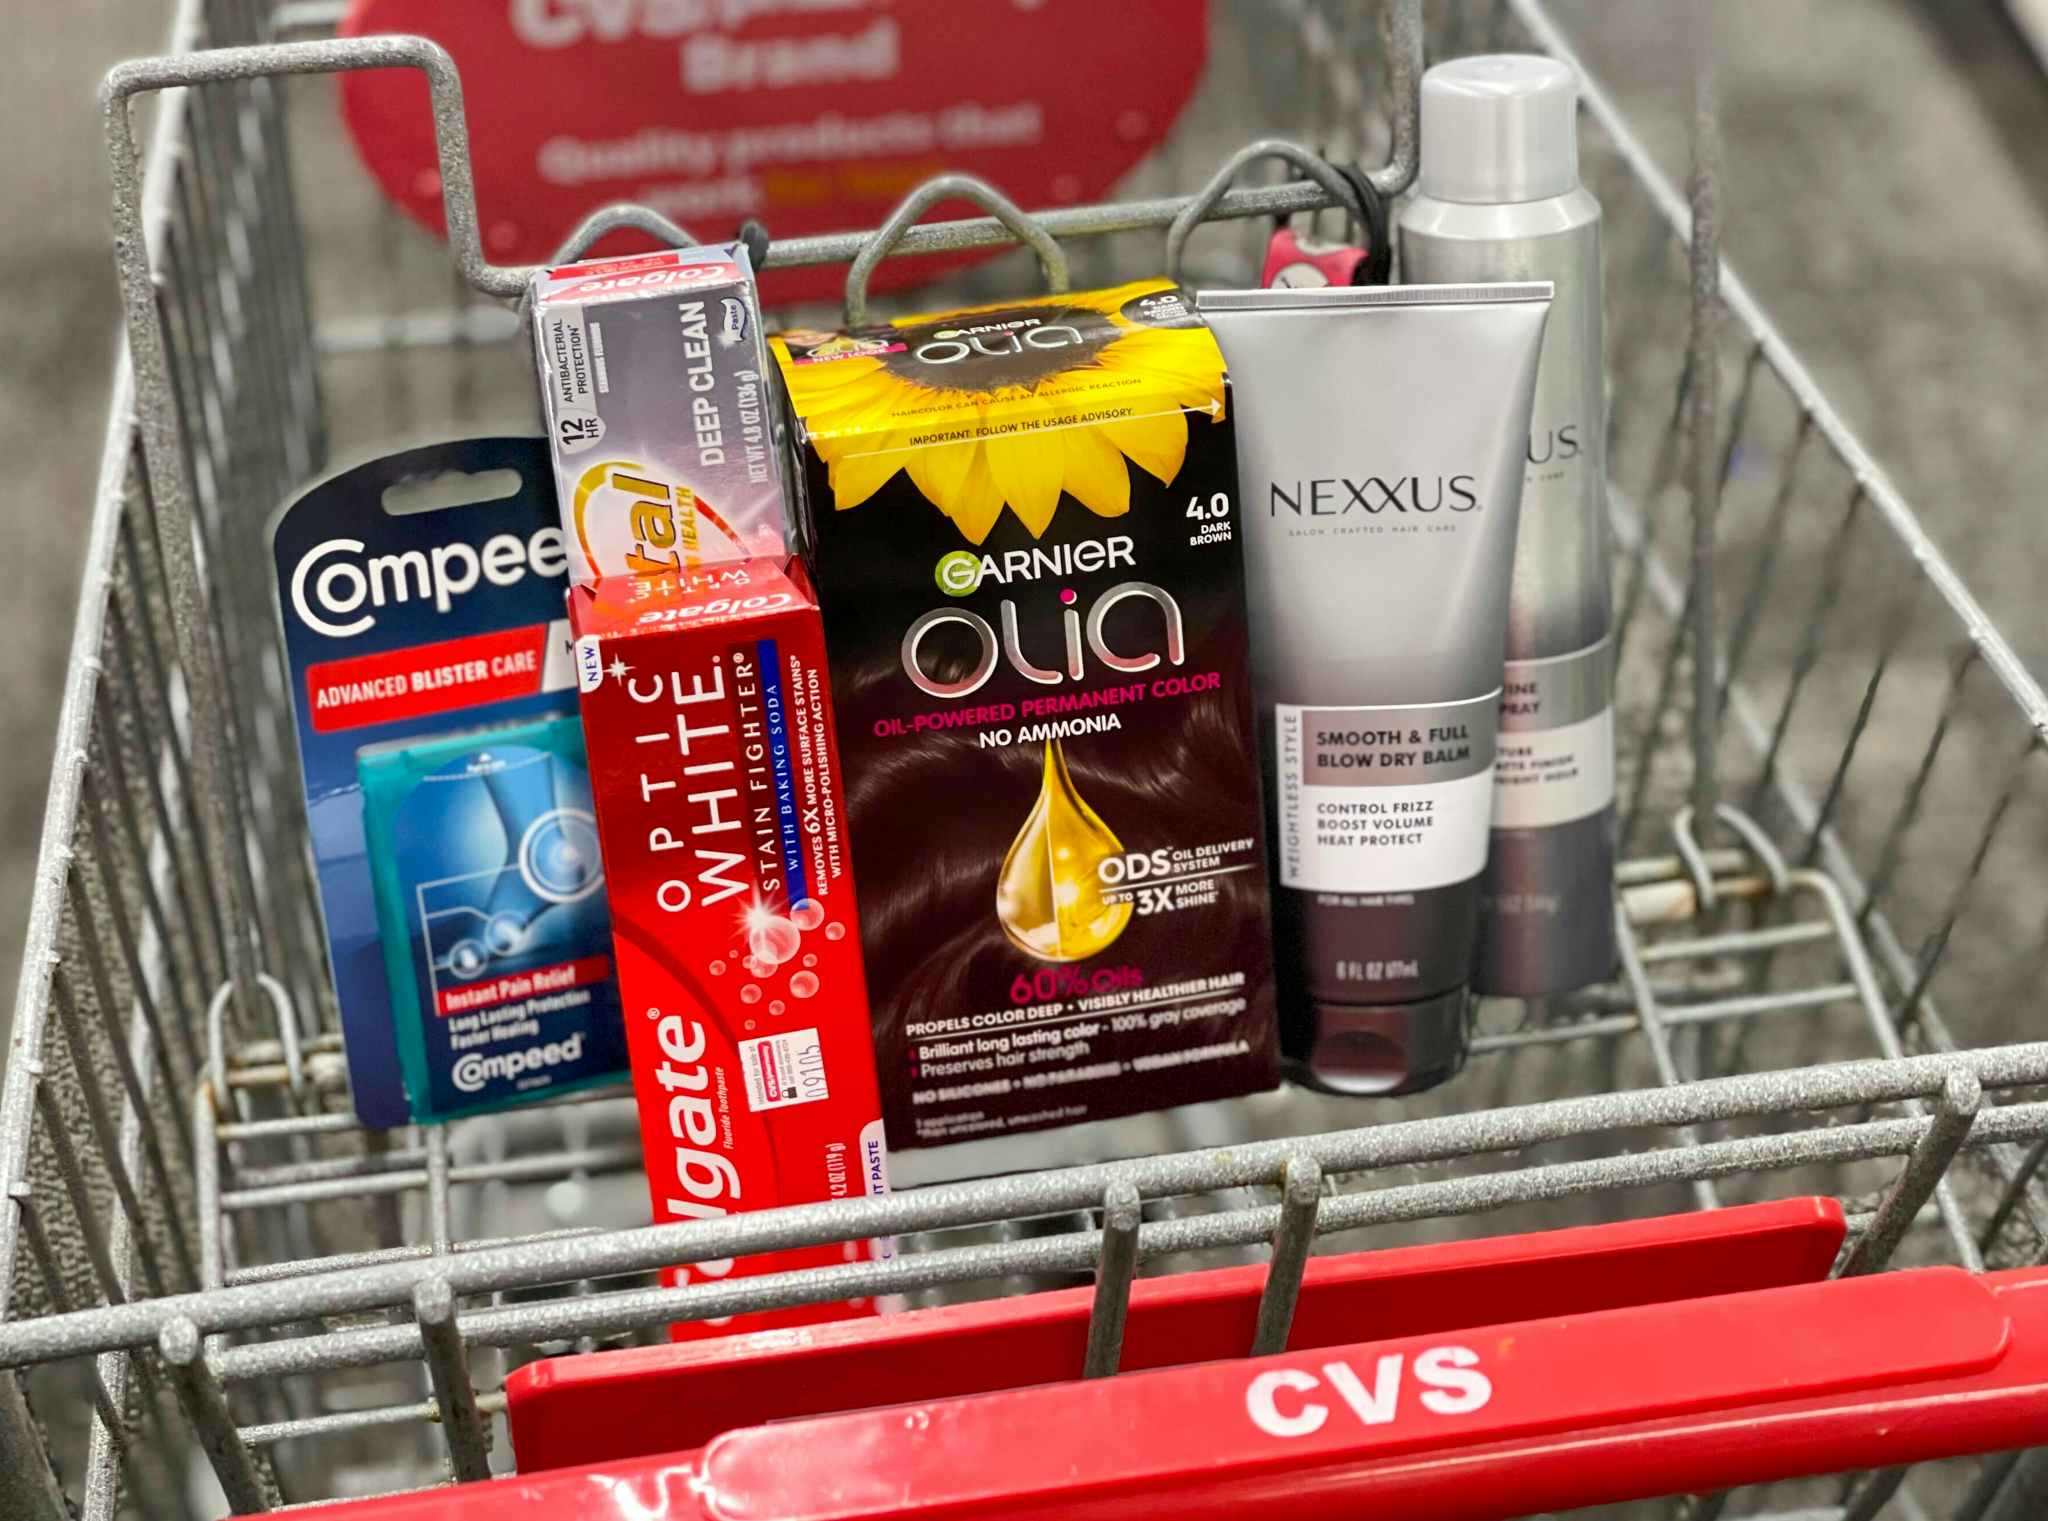 compeed, colgate, olia, and nexxus in cvs shopping cart